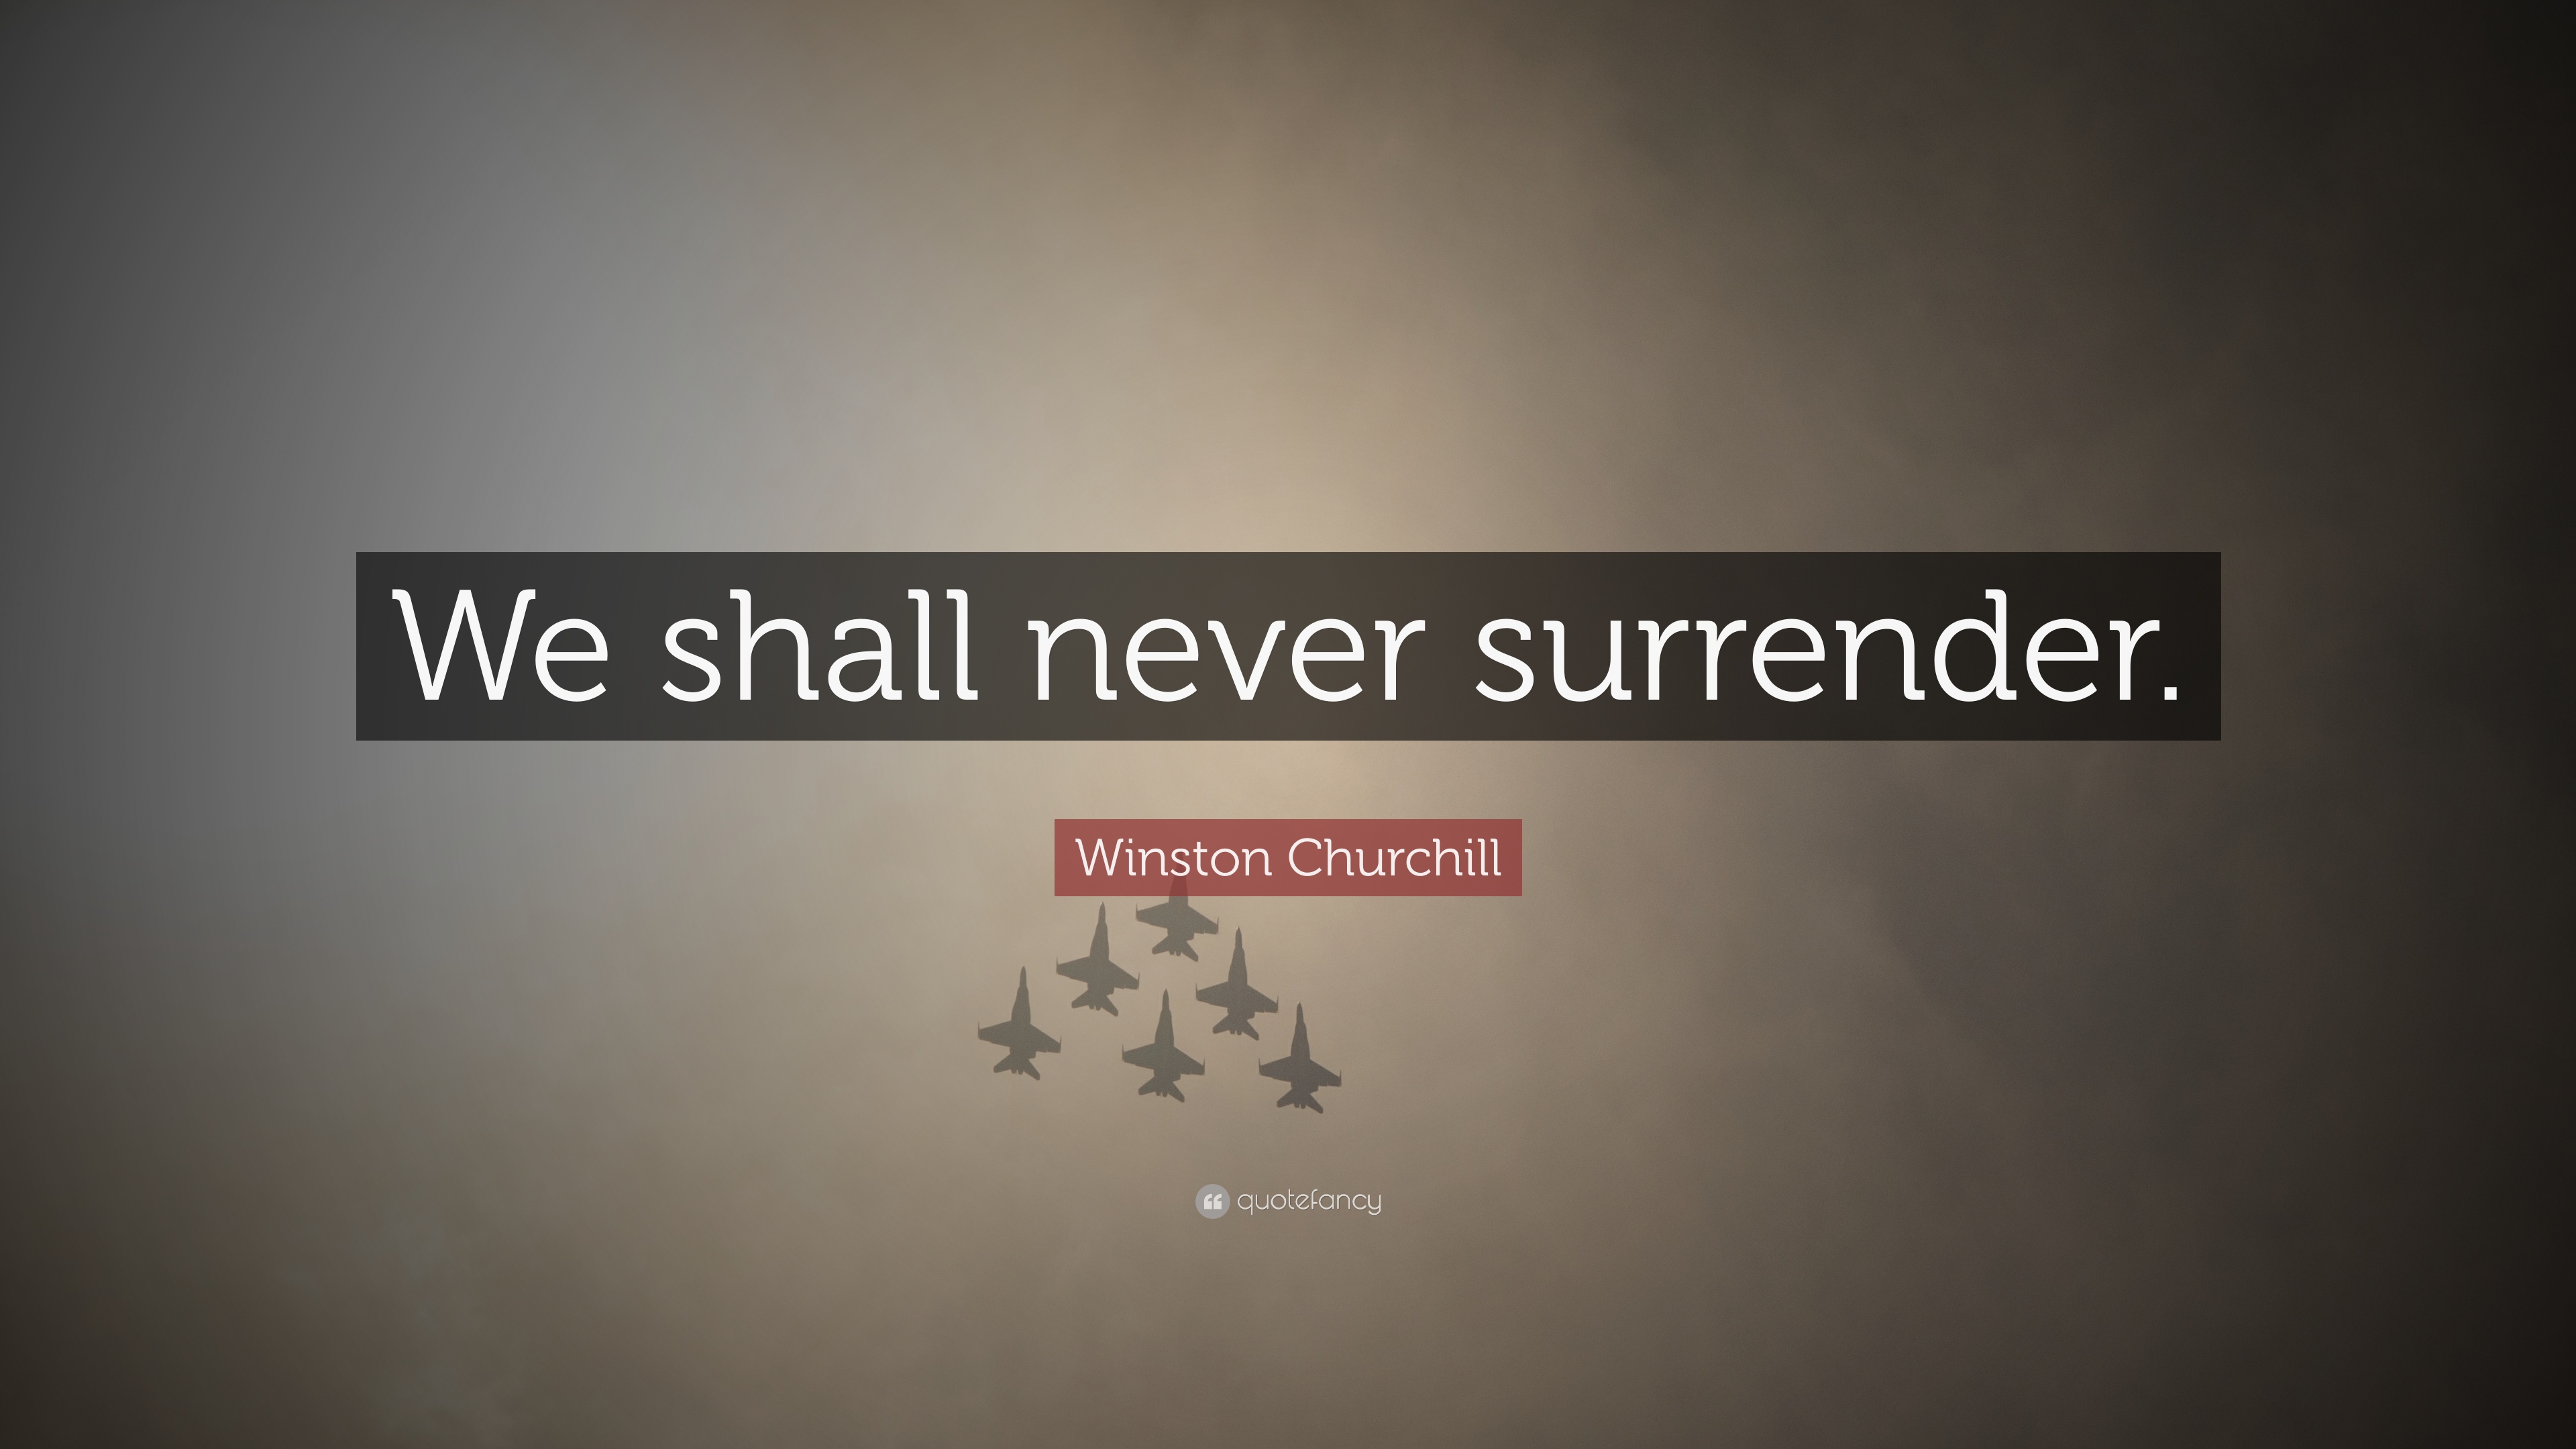 Winston Churchill - Rinus Michels Quotes , HD Wallpaper & Backgrounds